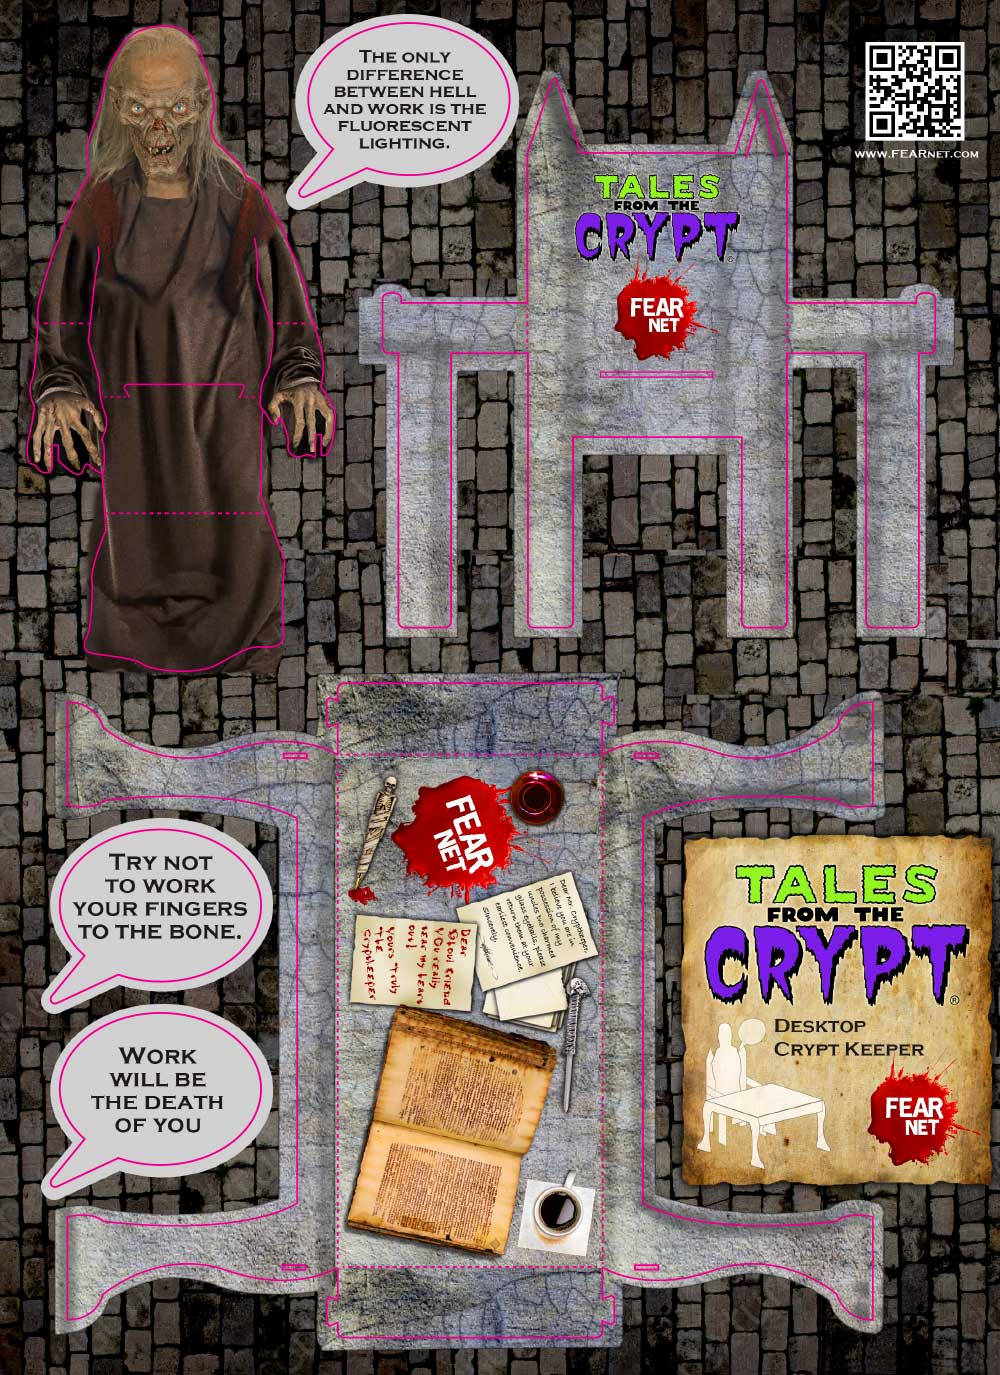 pop out crypt keeper for fear net by premium shapes